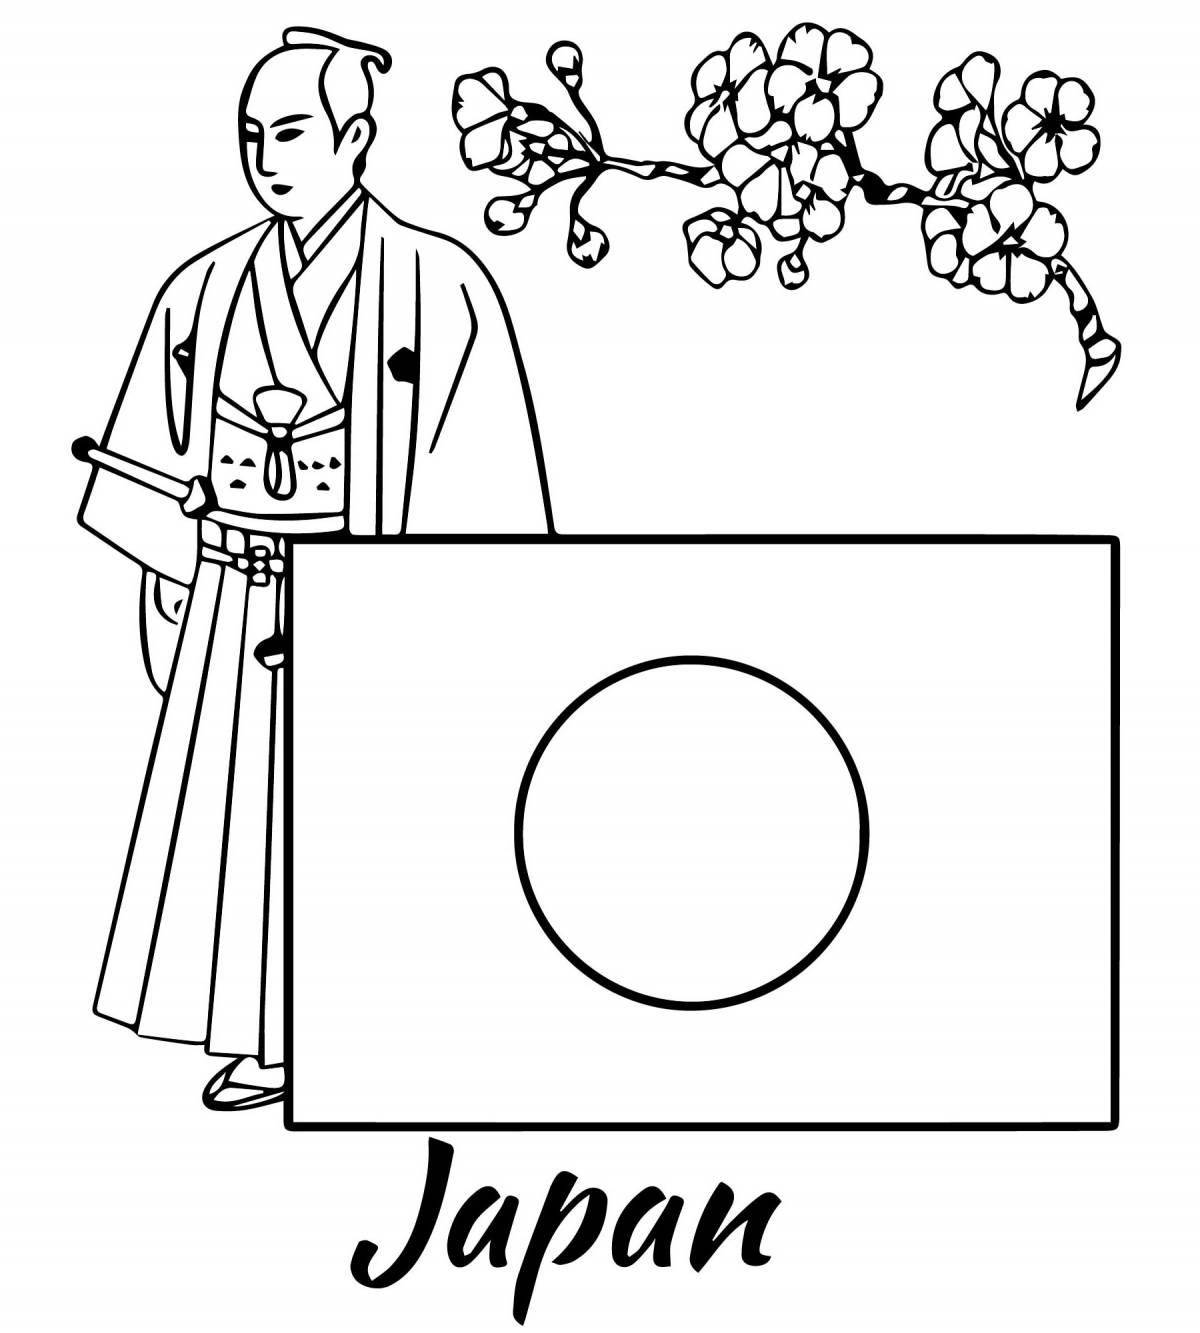 Exquisite Japanese coloring book for children